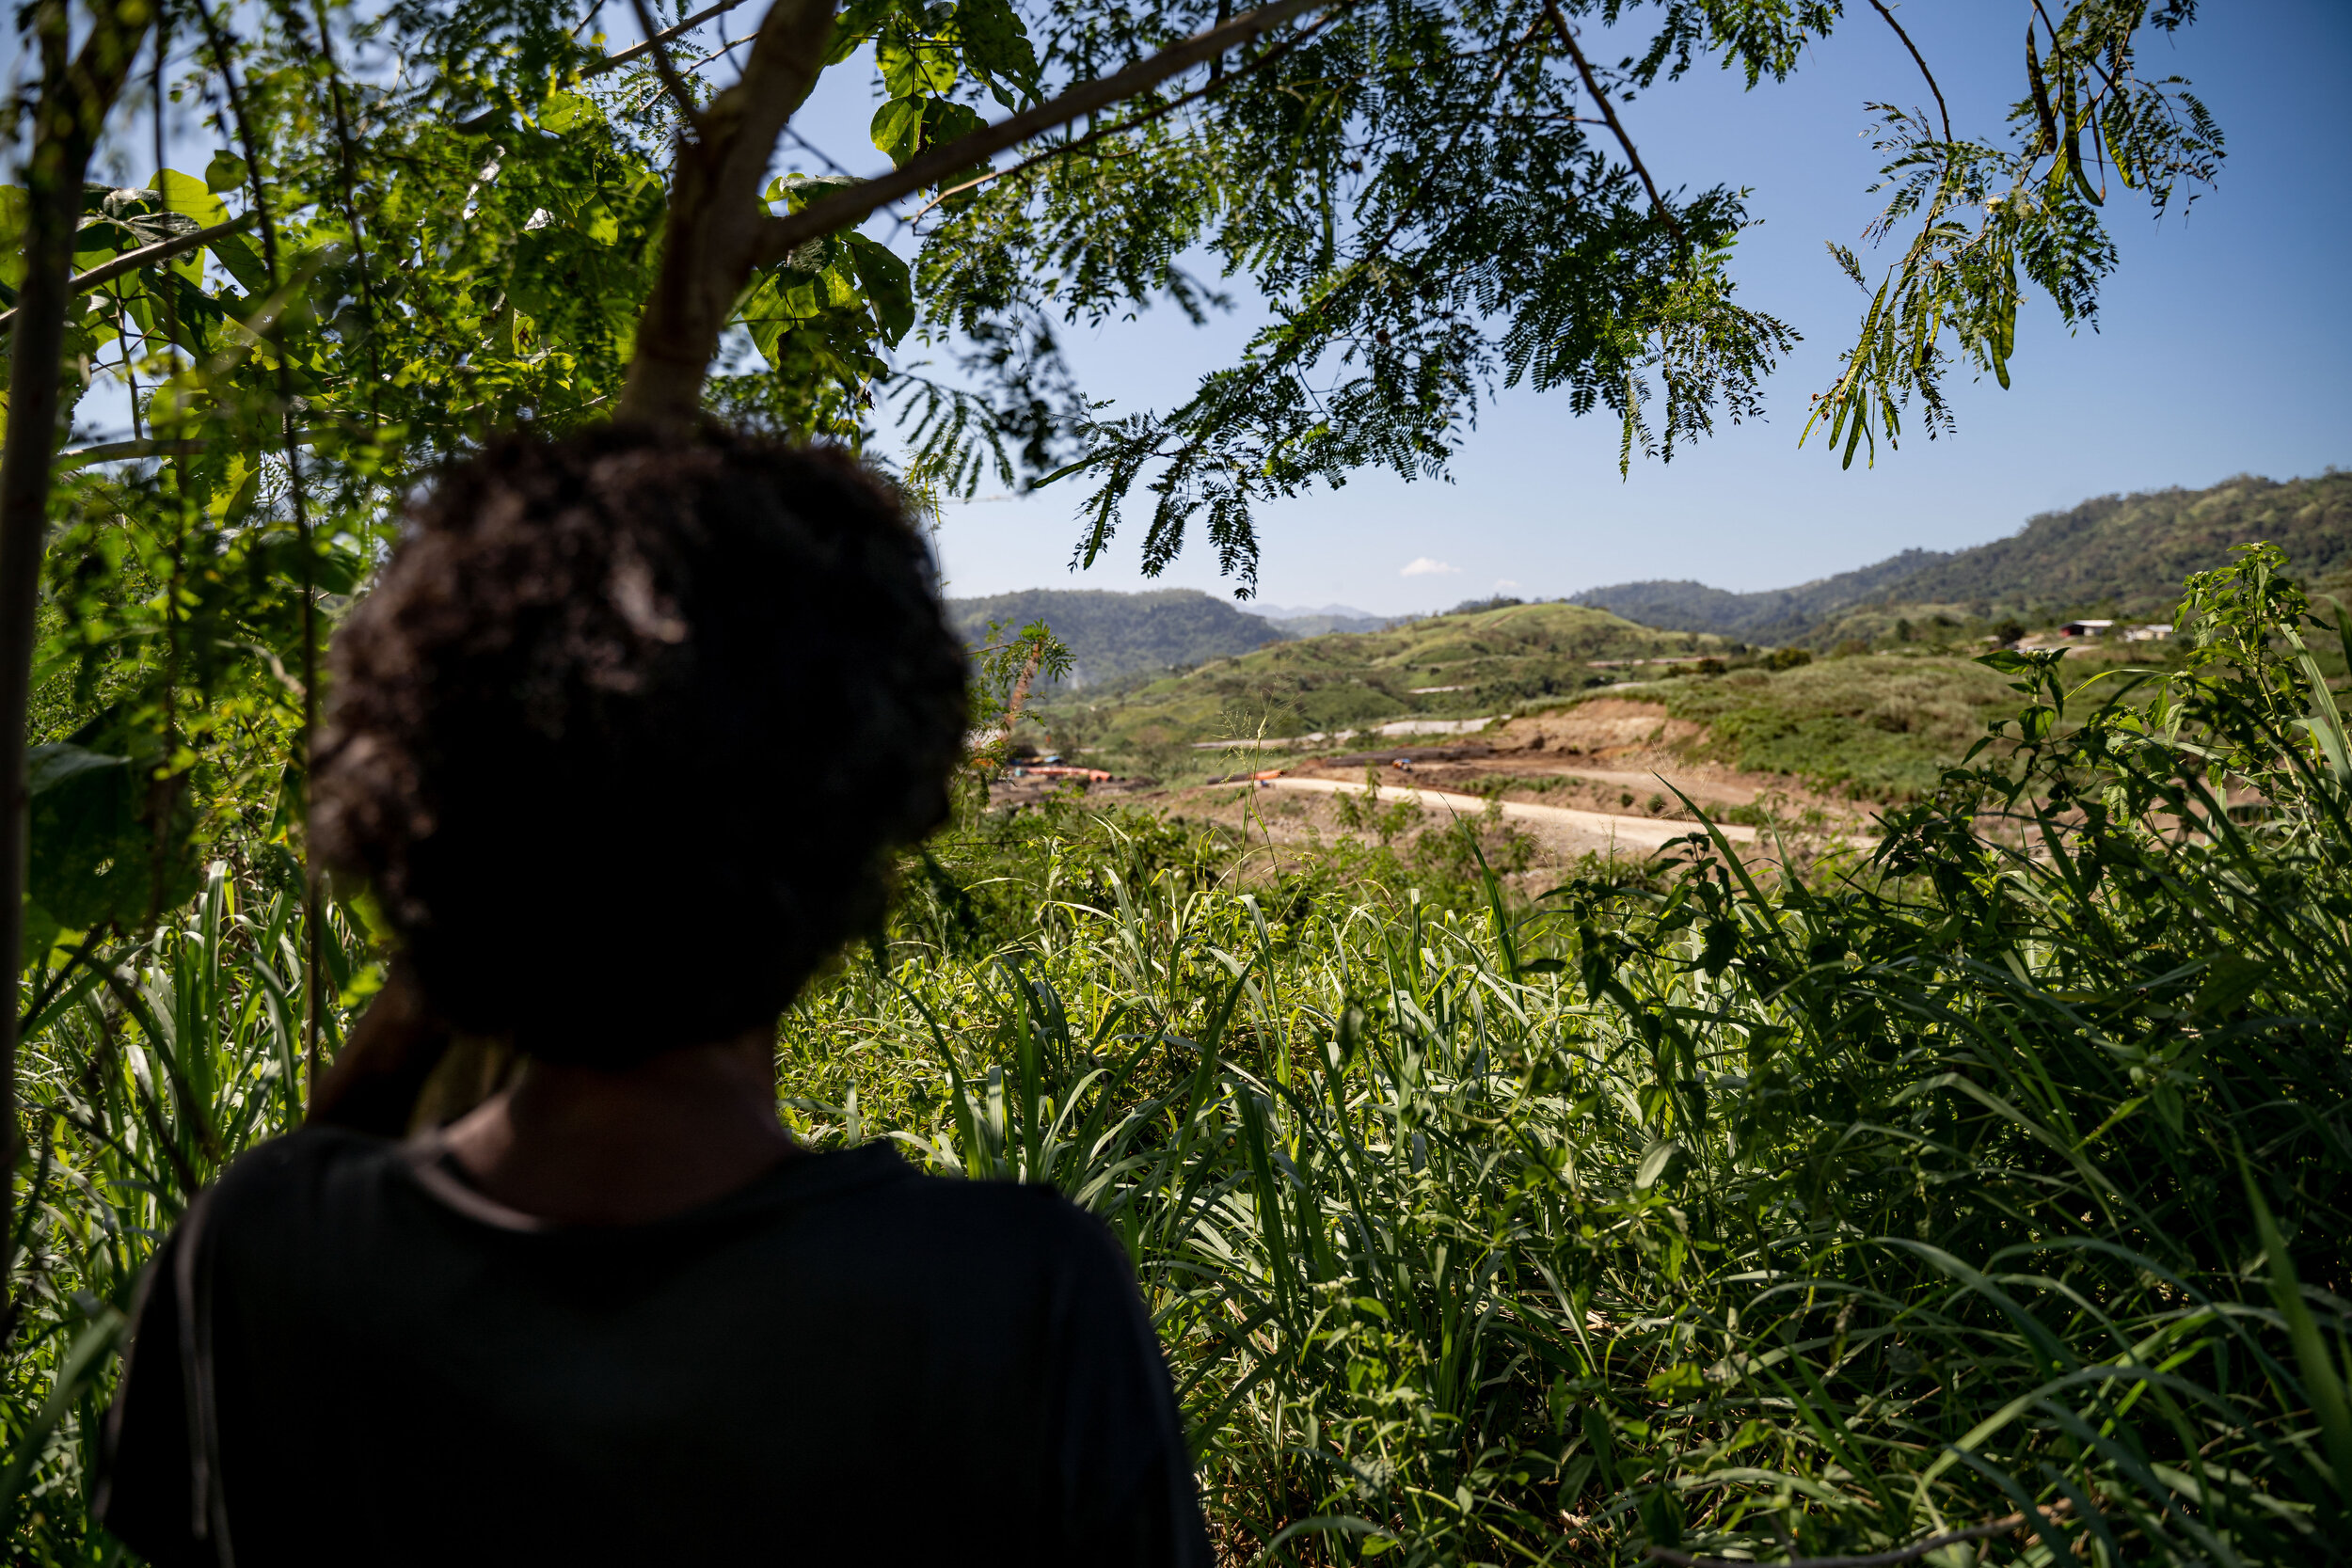  An Aeta looks at a construction site that was once cultivated land in Sitio Alli, Capas, Tarlac. Aeta communities fear their natural cultural markers are being demolished with the construction of the New Clark City project. 